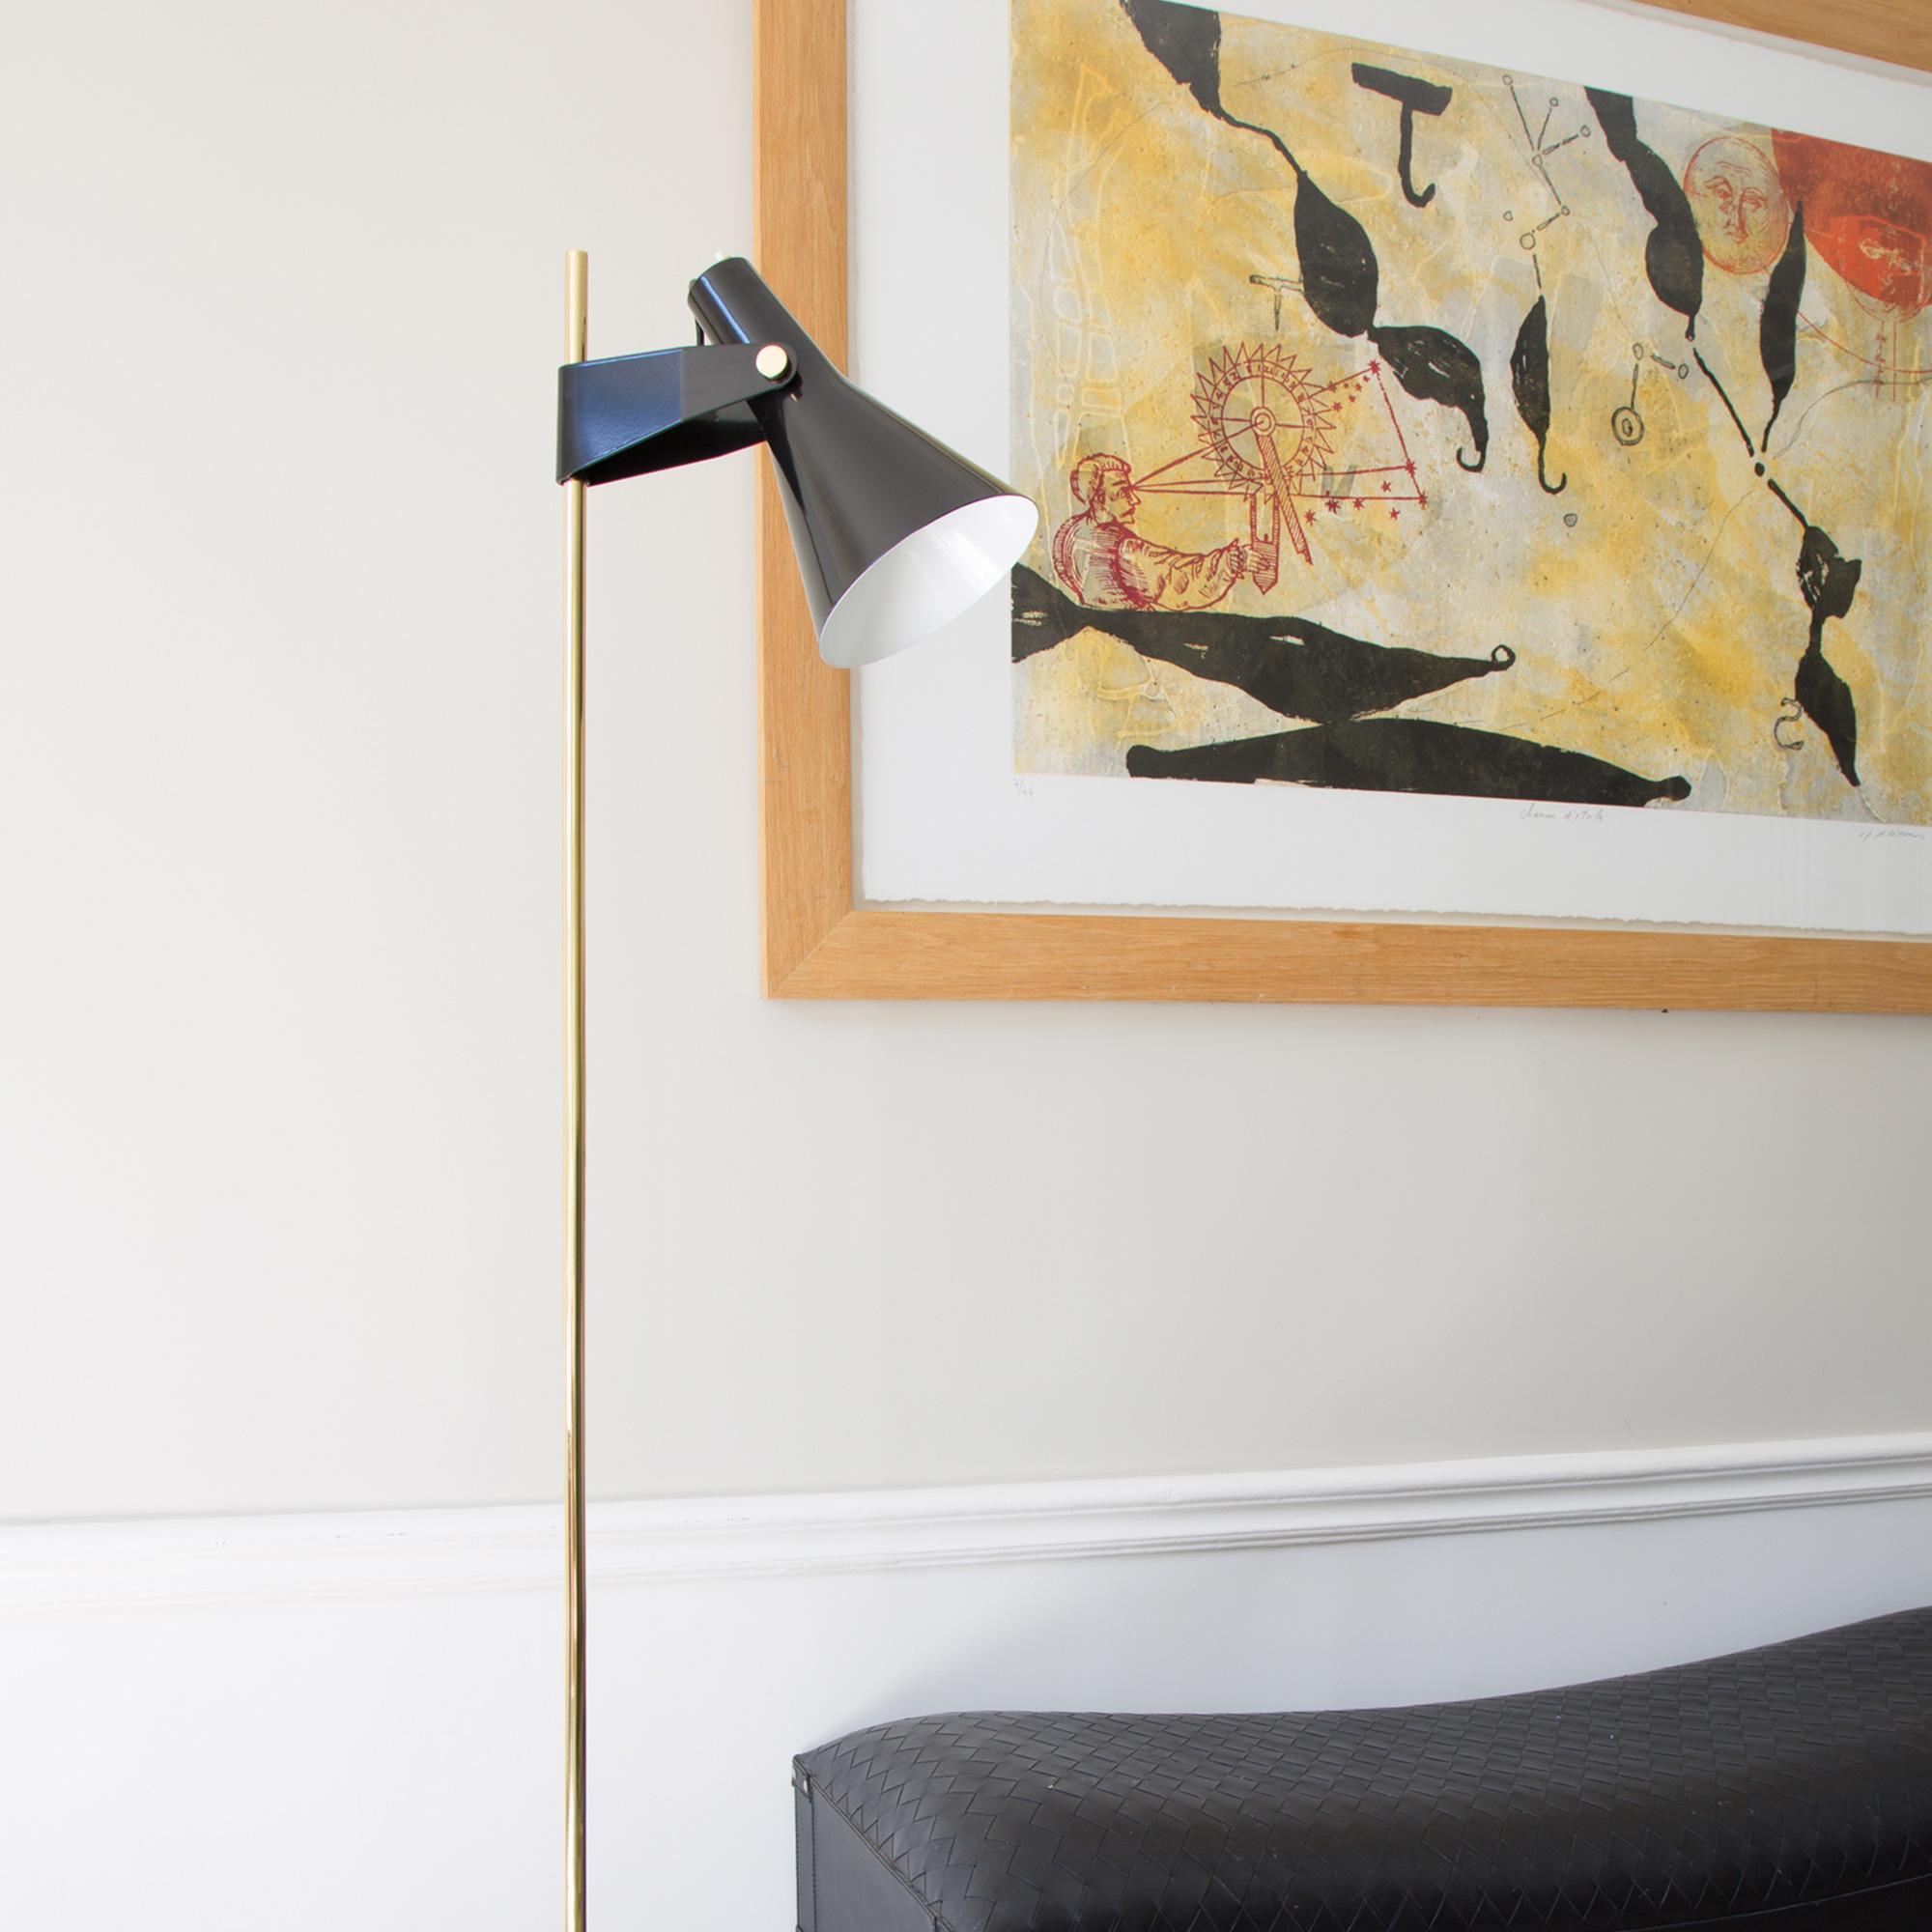 René-Jean Caillette B4 Floor Lamp for Disderot In New Condition For Sale In Glendale, CA